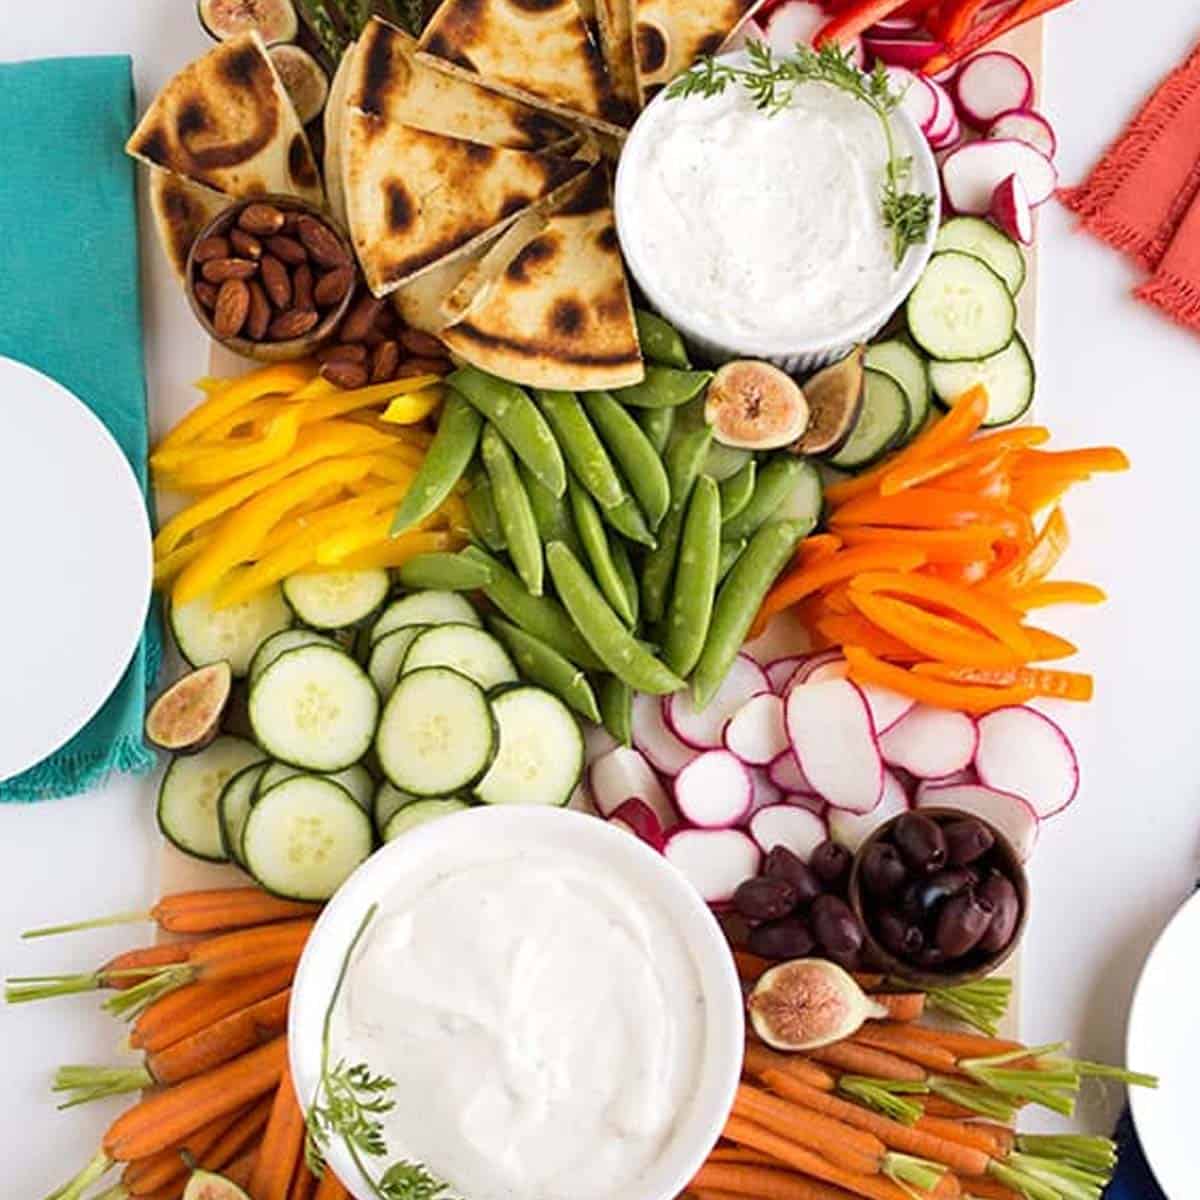 Veggie tray as a traditional Thanksgiving starter